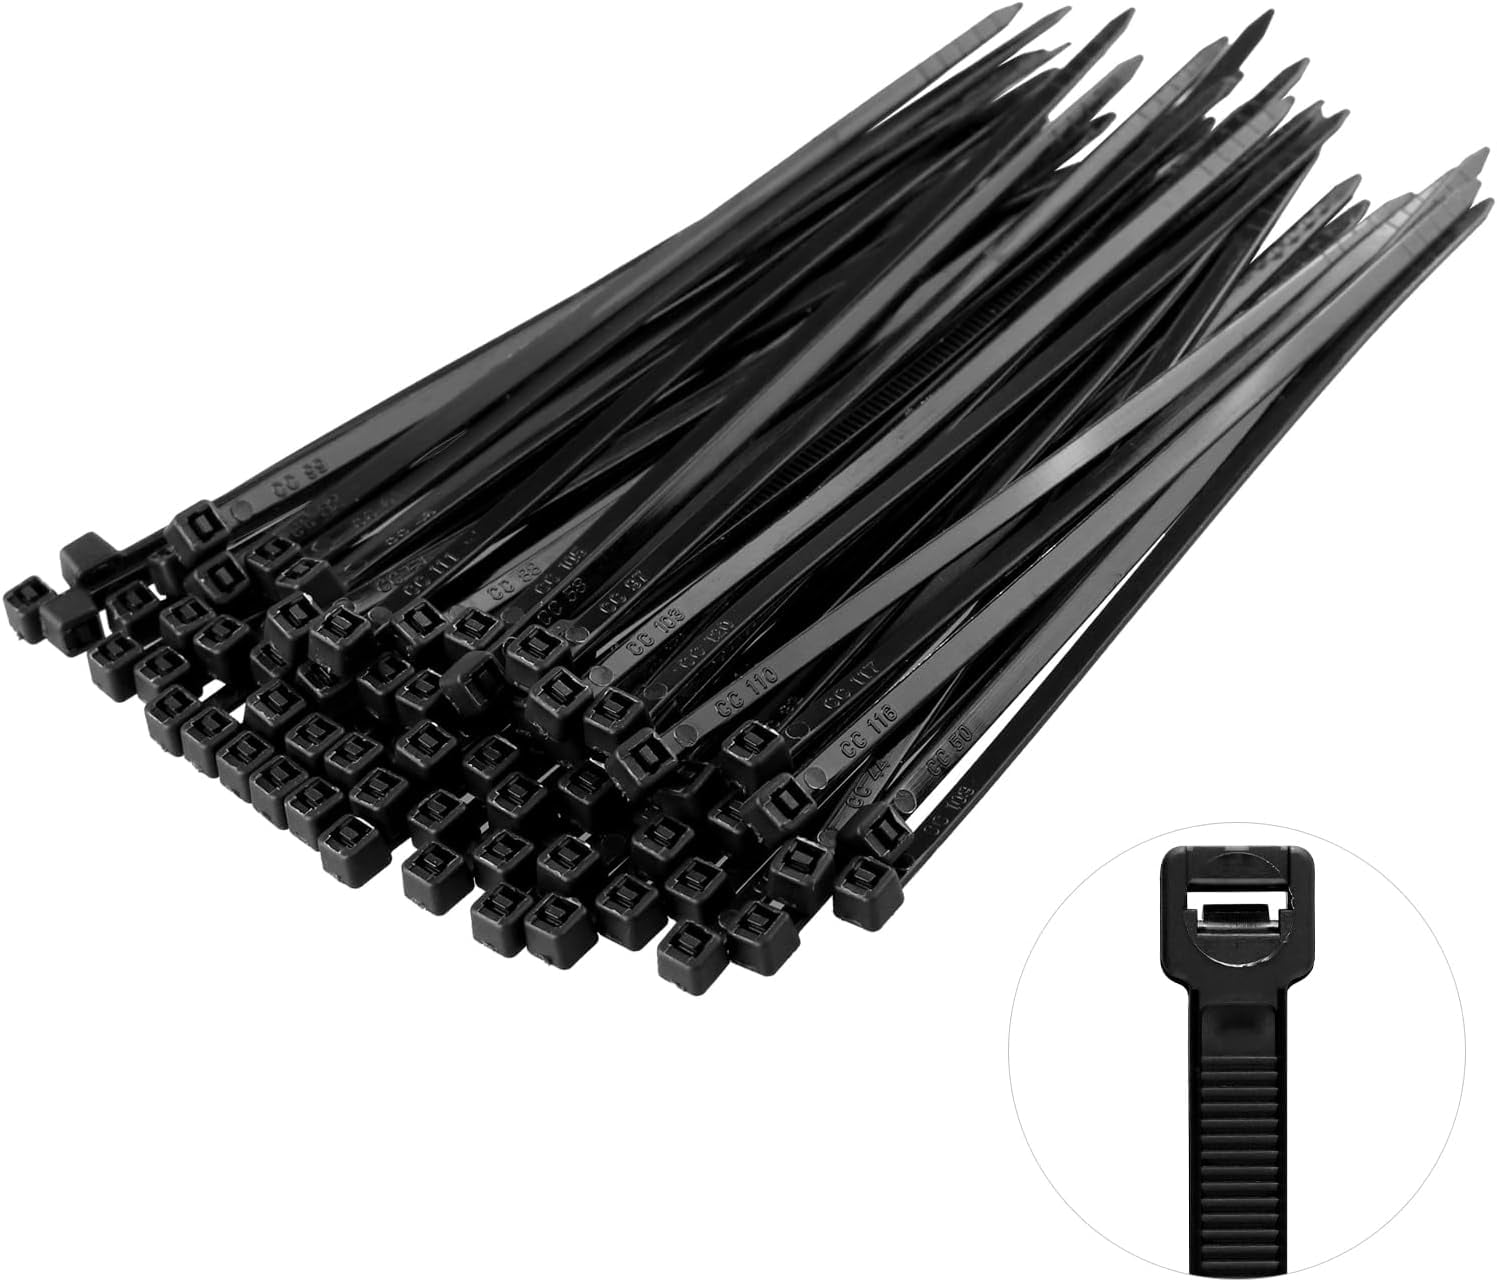 Xinqinghao Wire organizar Organizer Strips Black Cable Reusable Rope cables  Tools & Home Improvement Black 